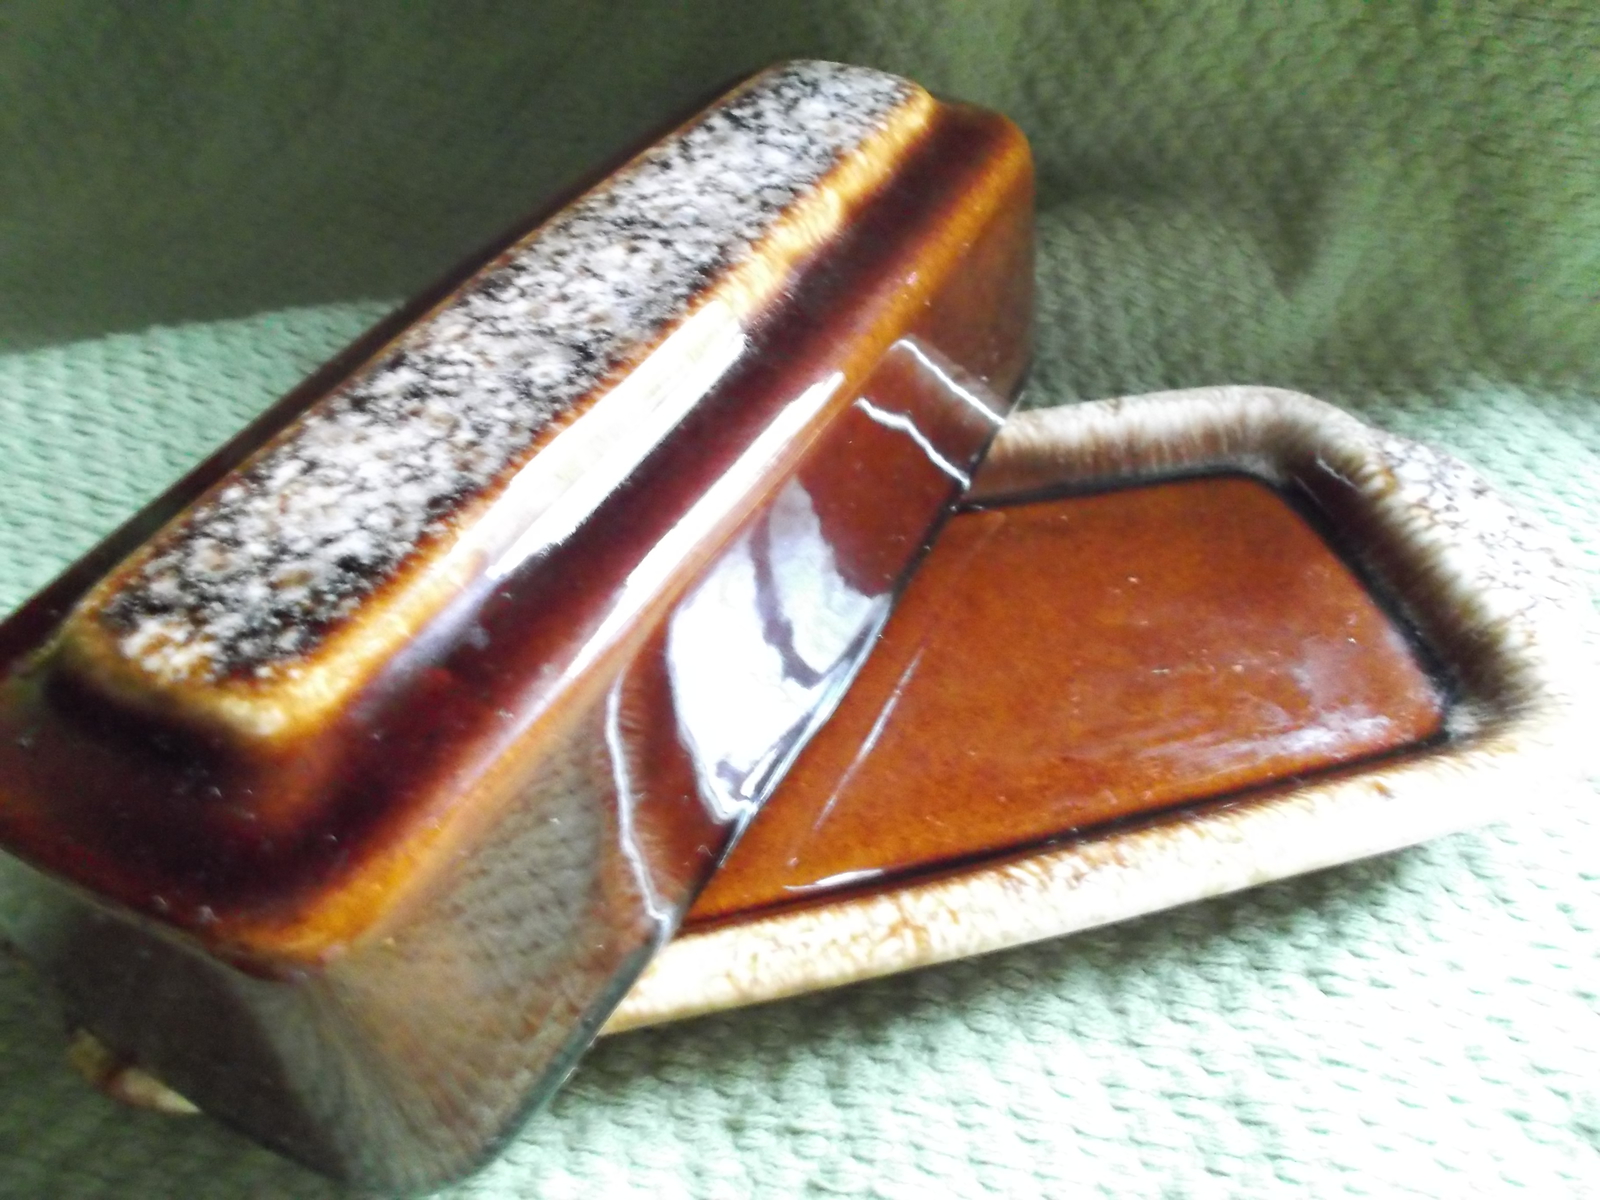 Hull Brown Butter Dish - $30.00